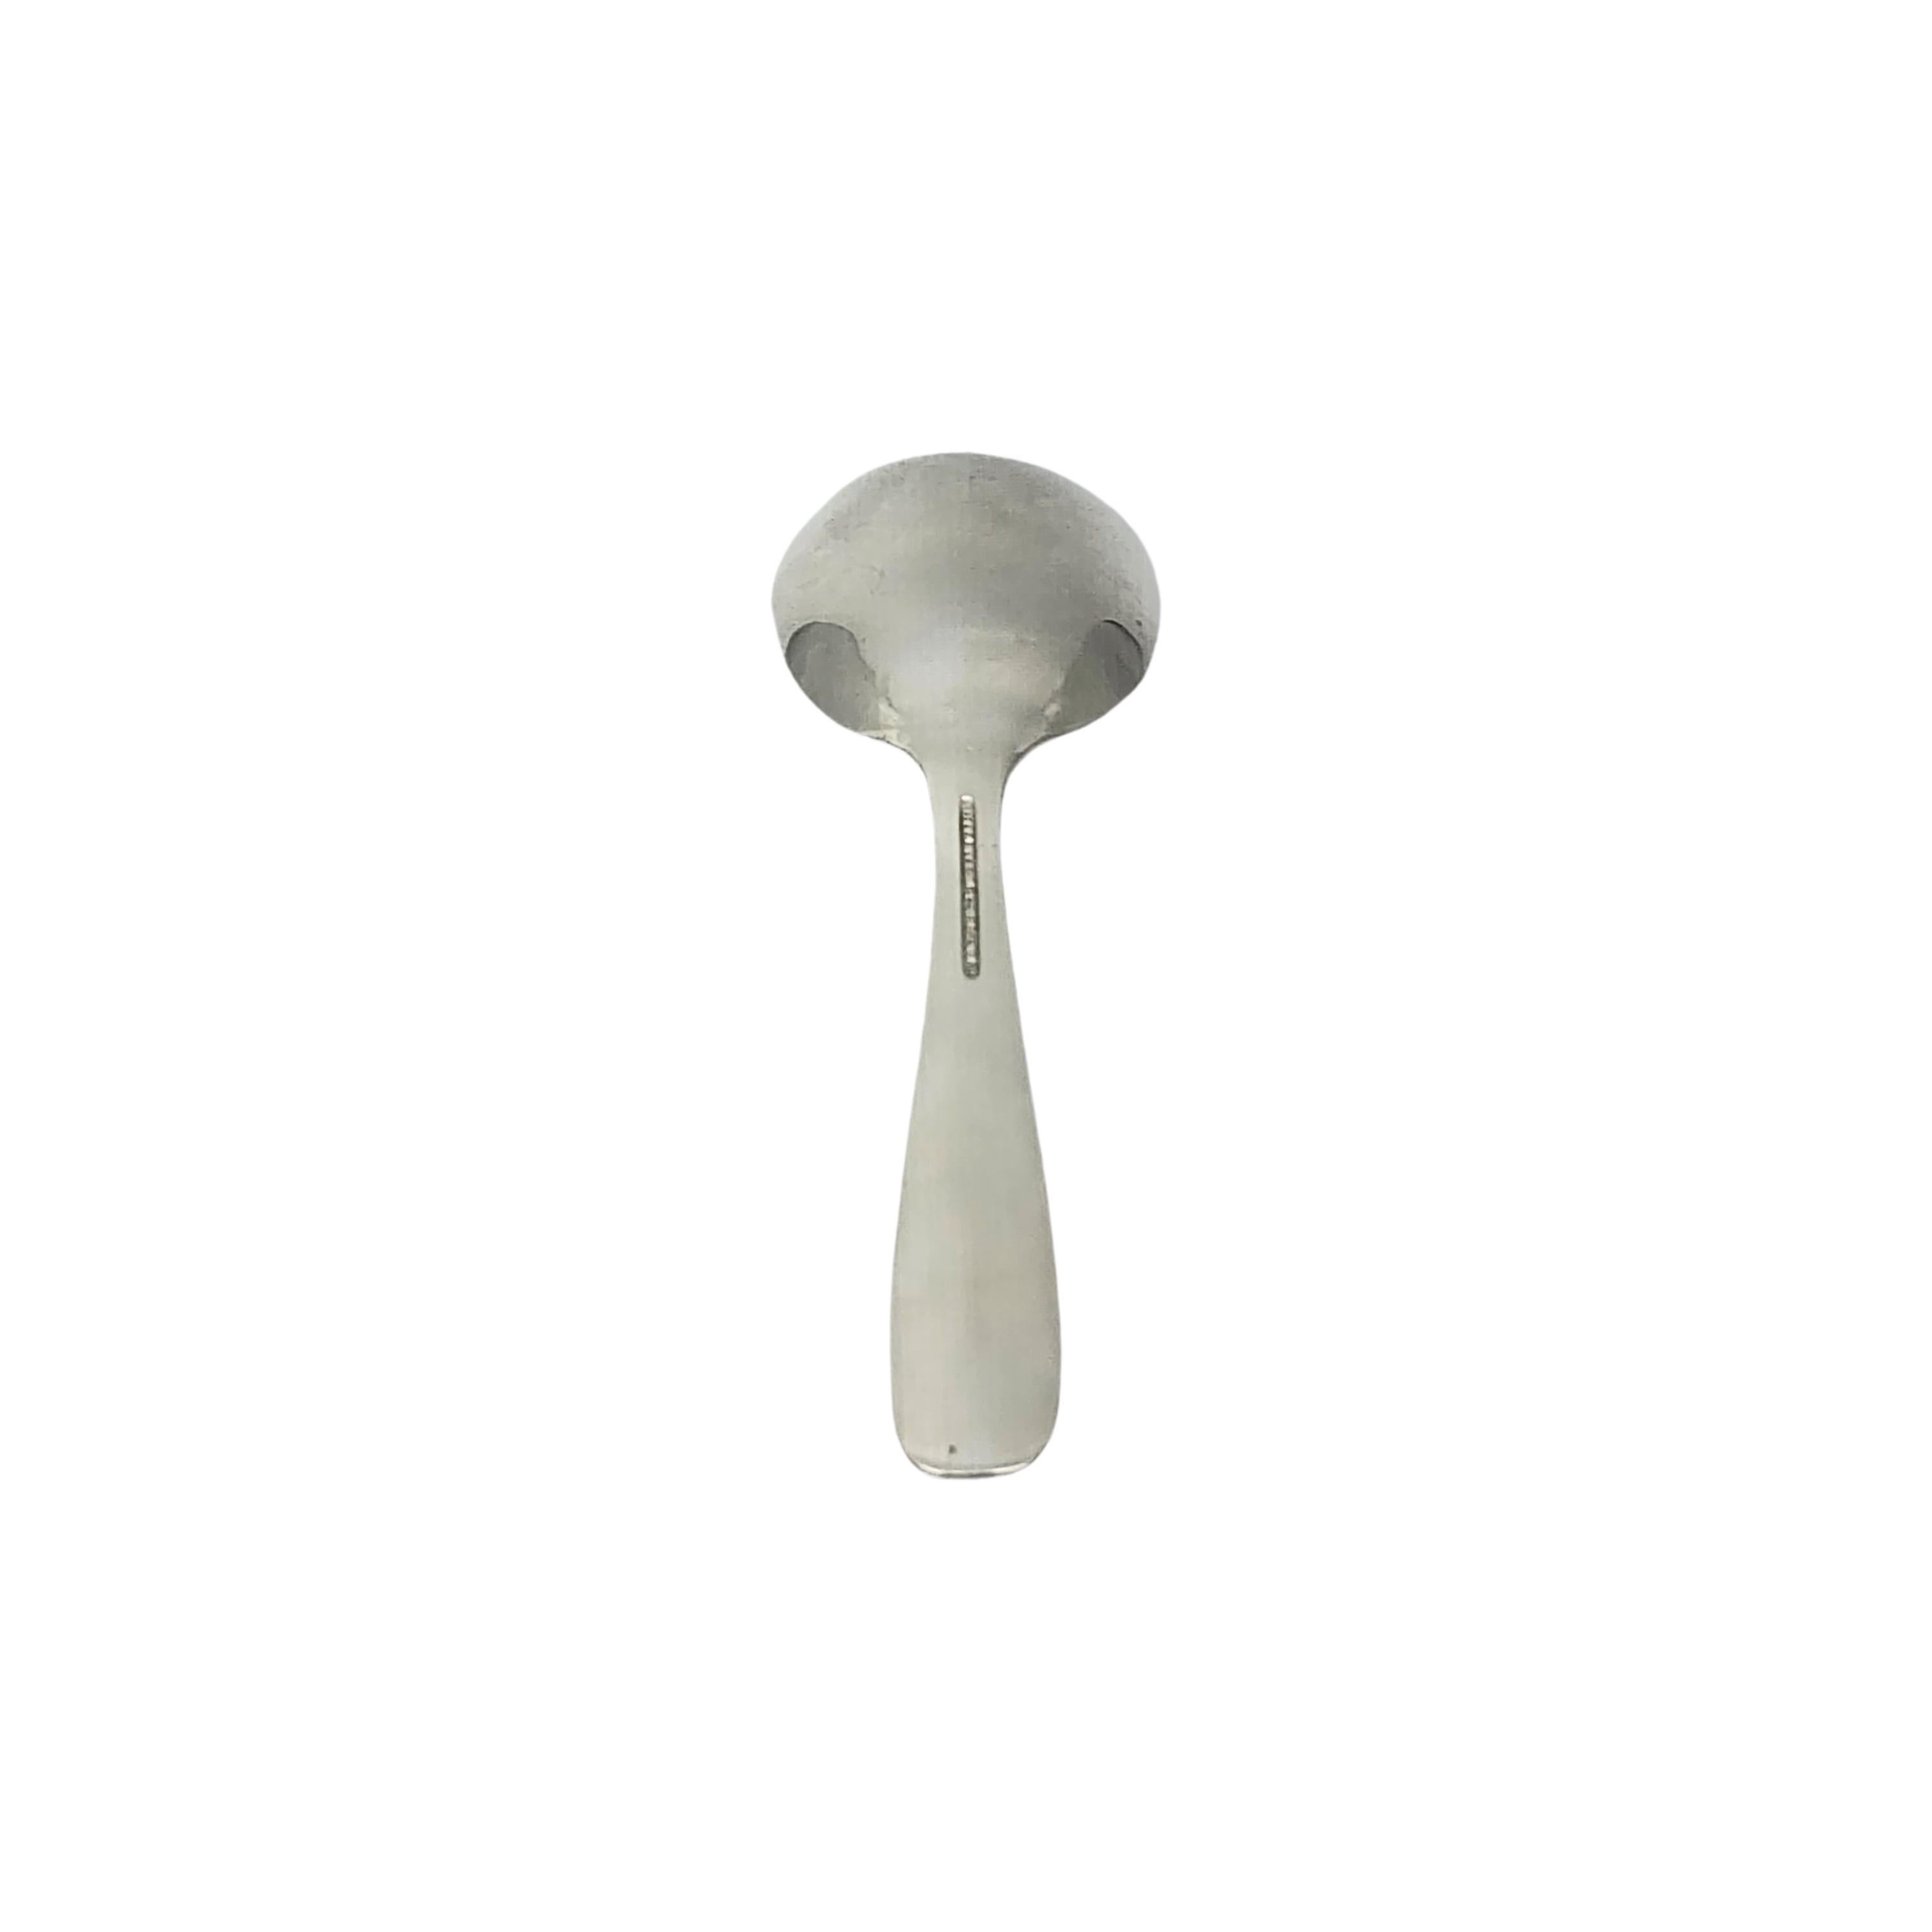 Tiffany & Co sterling silver child/baby feeding spoon.

No monogram or engraving

A small spoon in the simple and classic design. Hallmarks date this piece to manufacture under the directorship of John C. Moore II, 1907-1947. Does not include